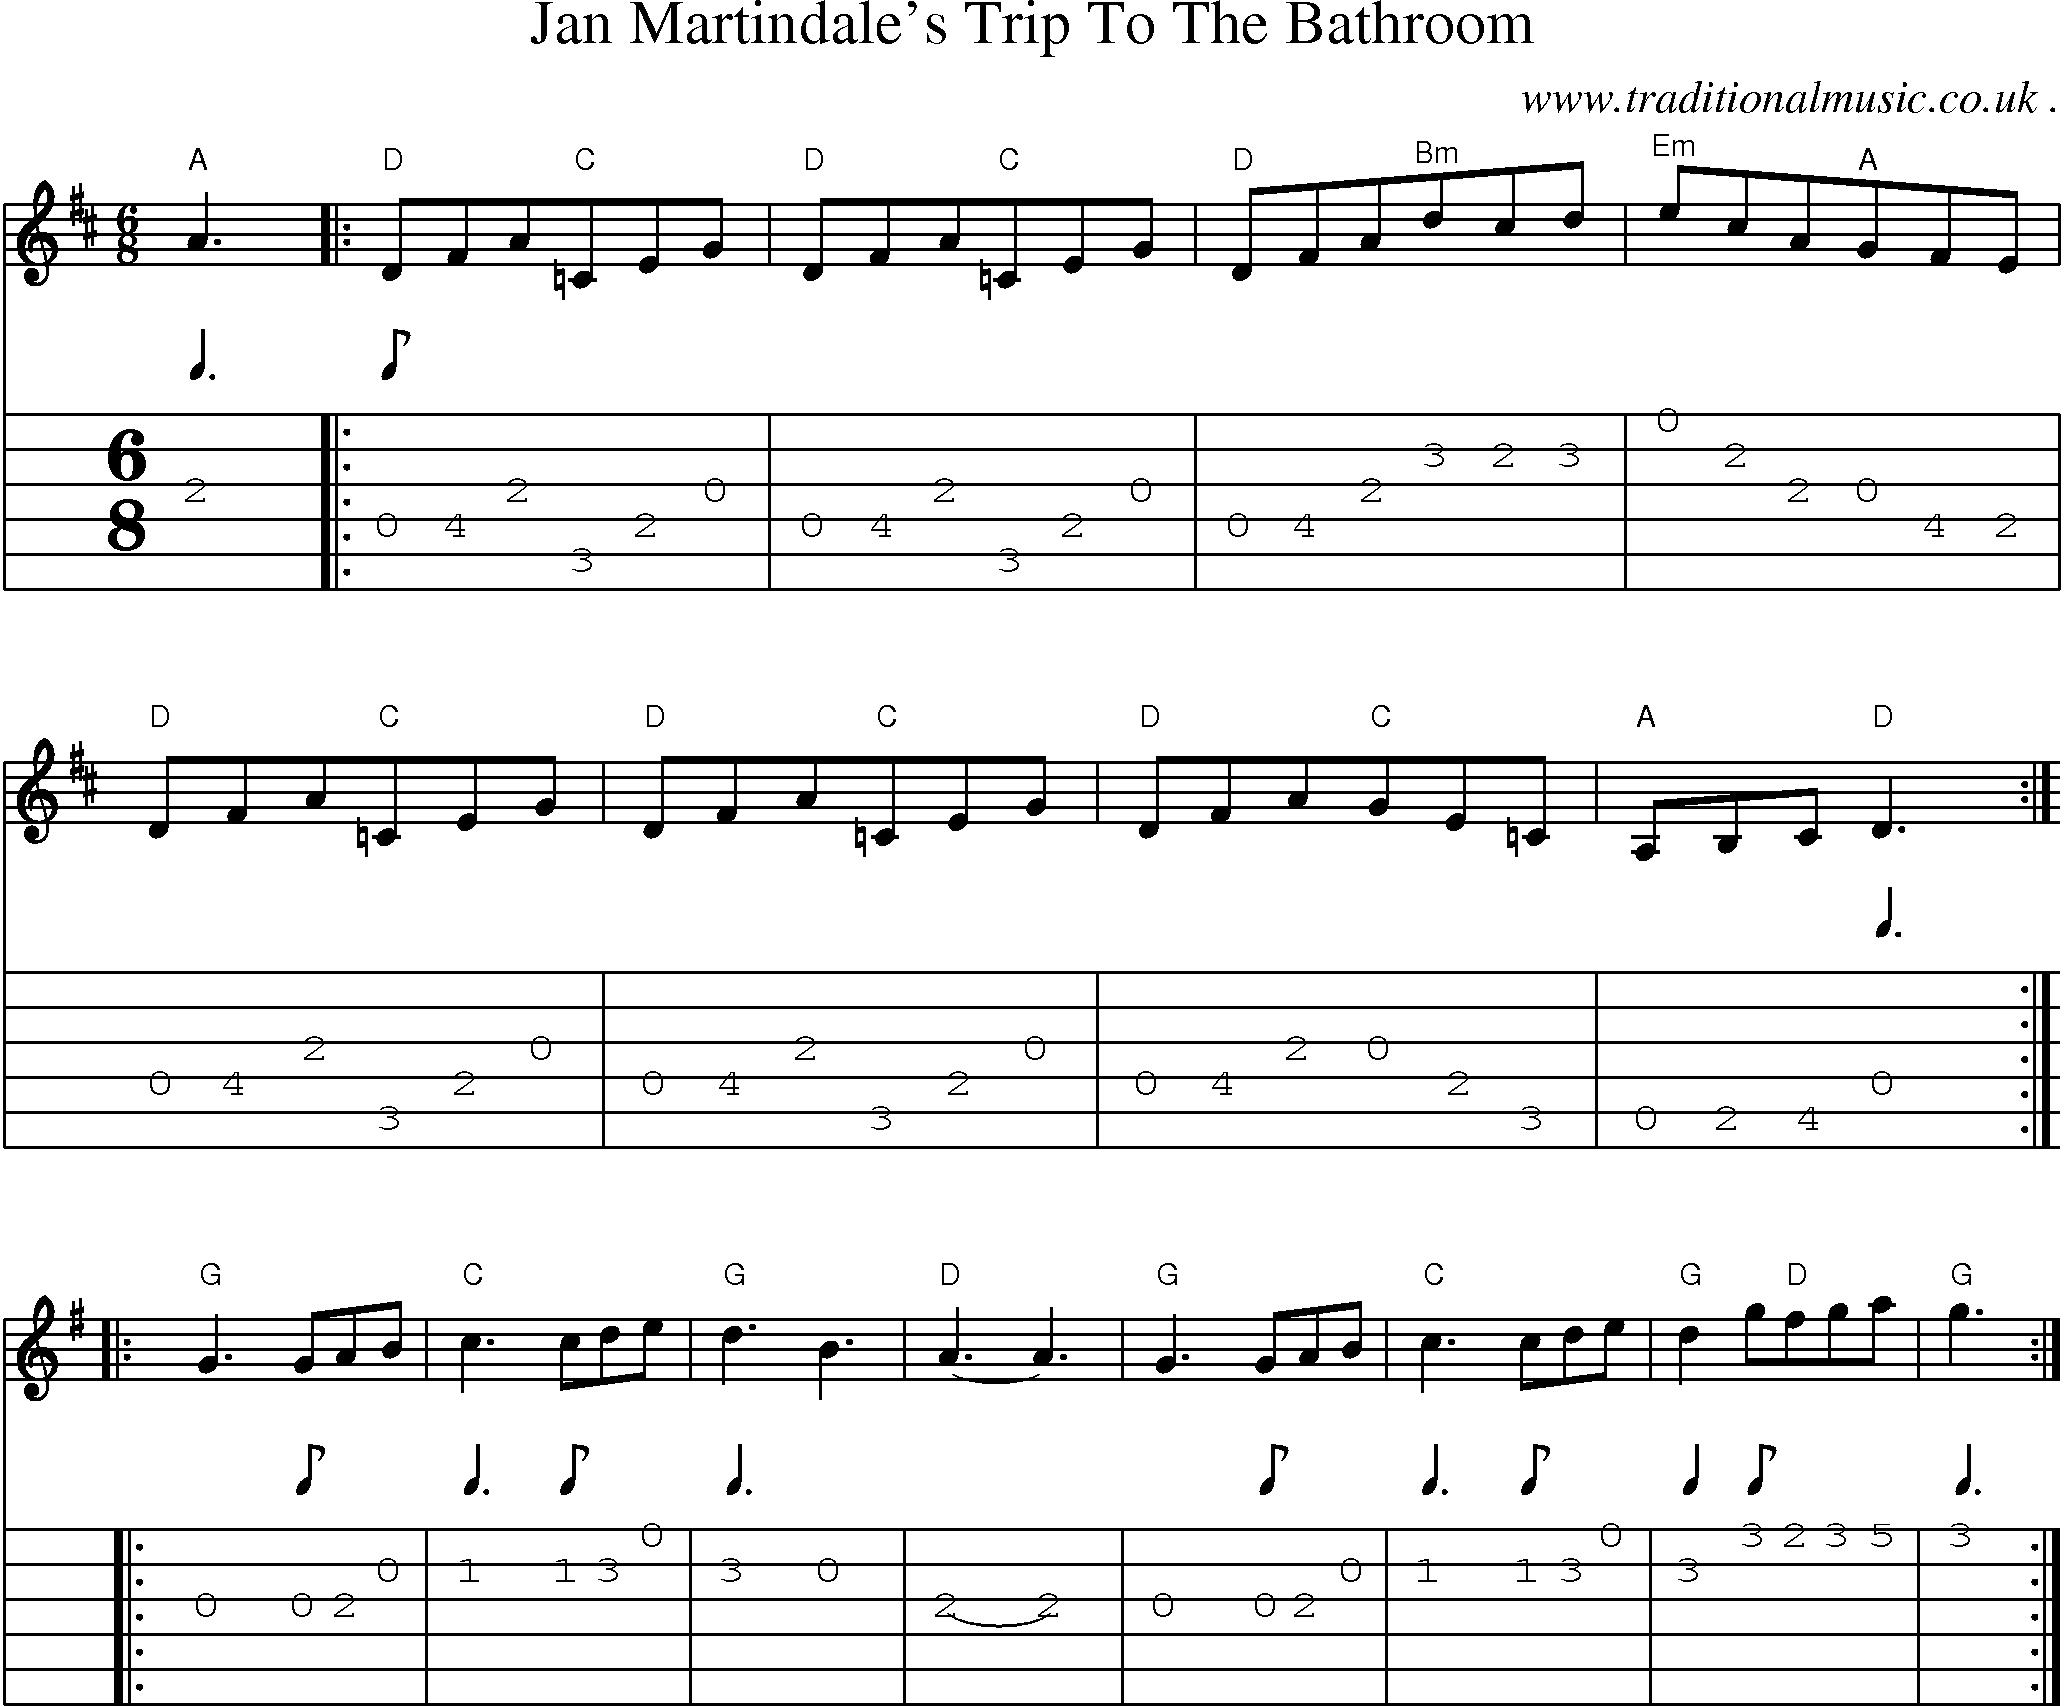 Sheet-Music and Guitar Tabs for Jan Martindales Trip To The Bathroom